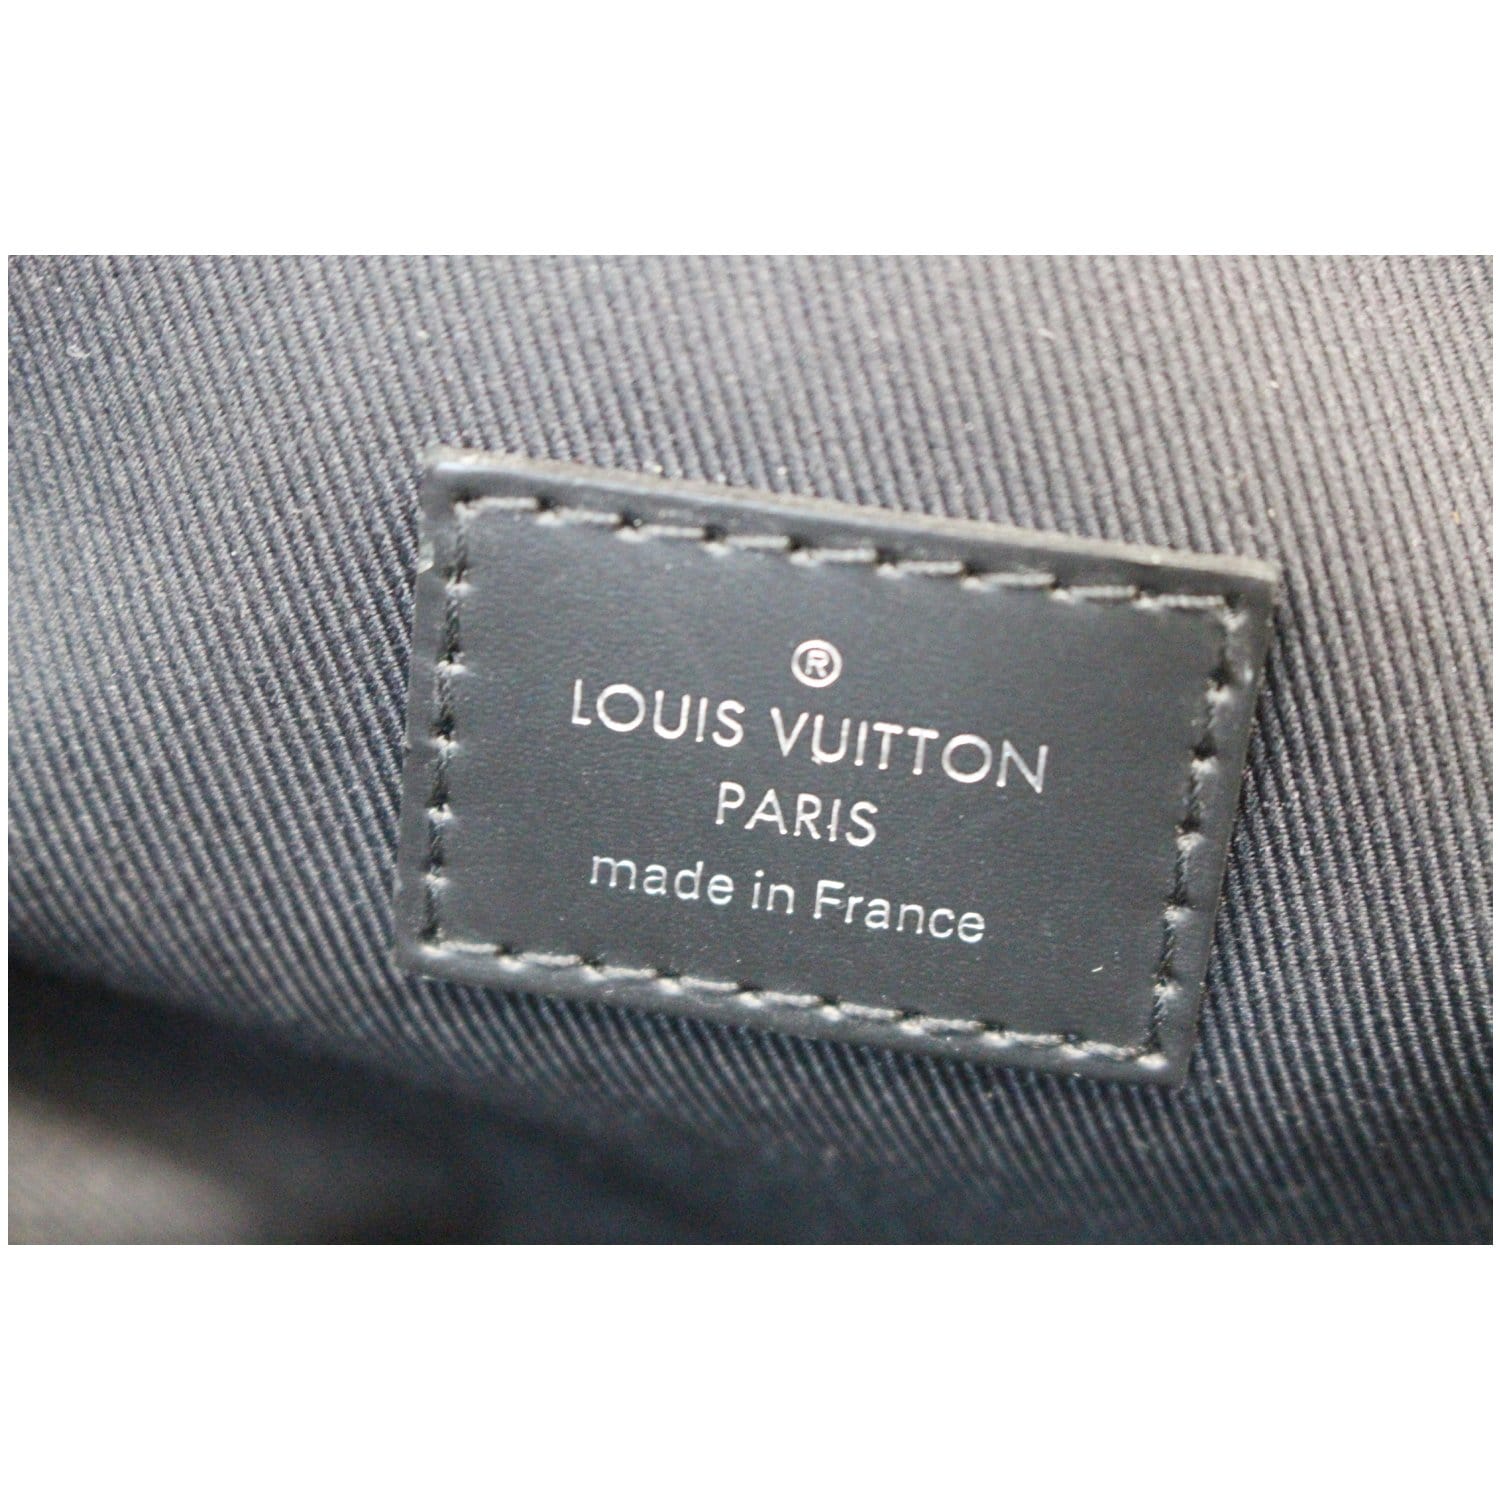 Louis Vuitton Luggage Tag made in France  Louis vuitton luggage tag, Louis  vuitton, Luggage tags